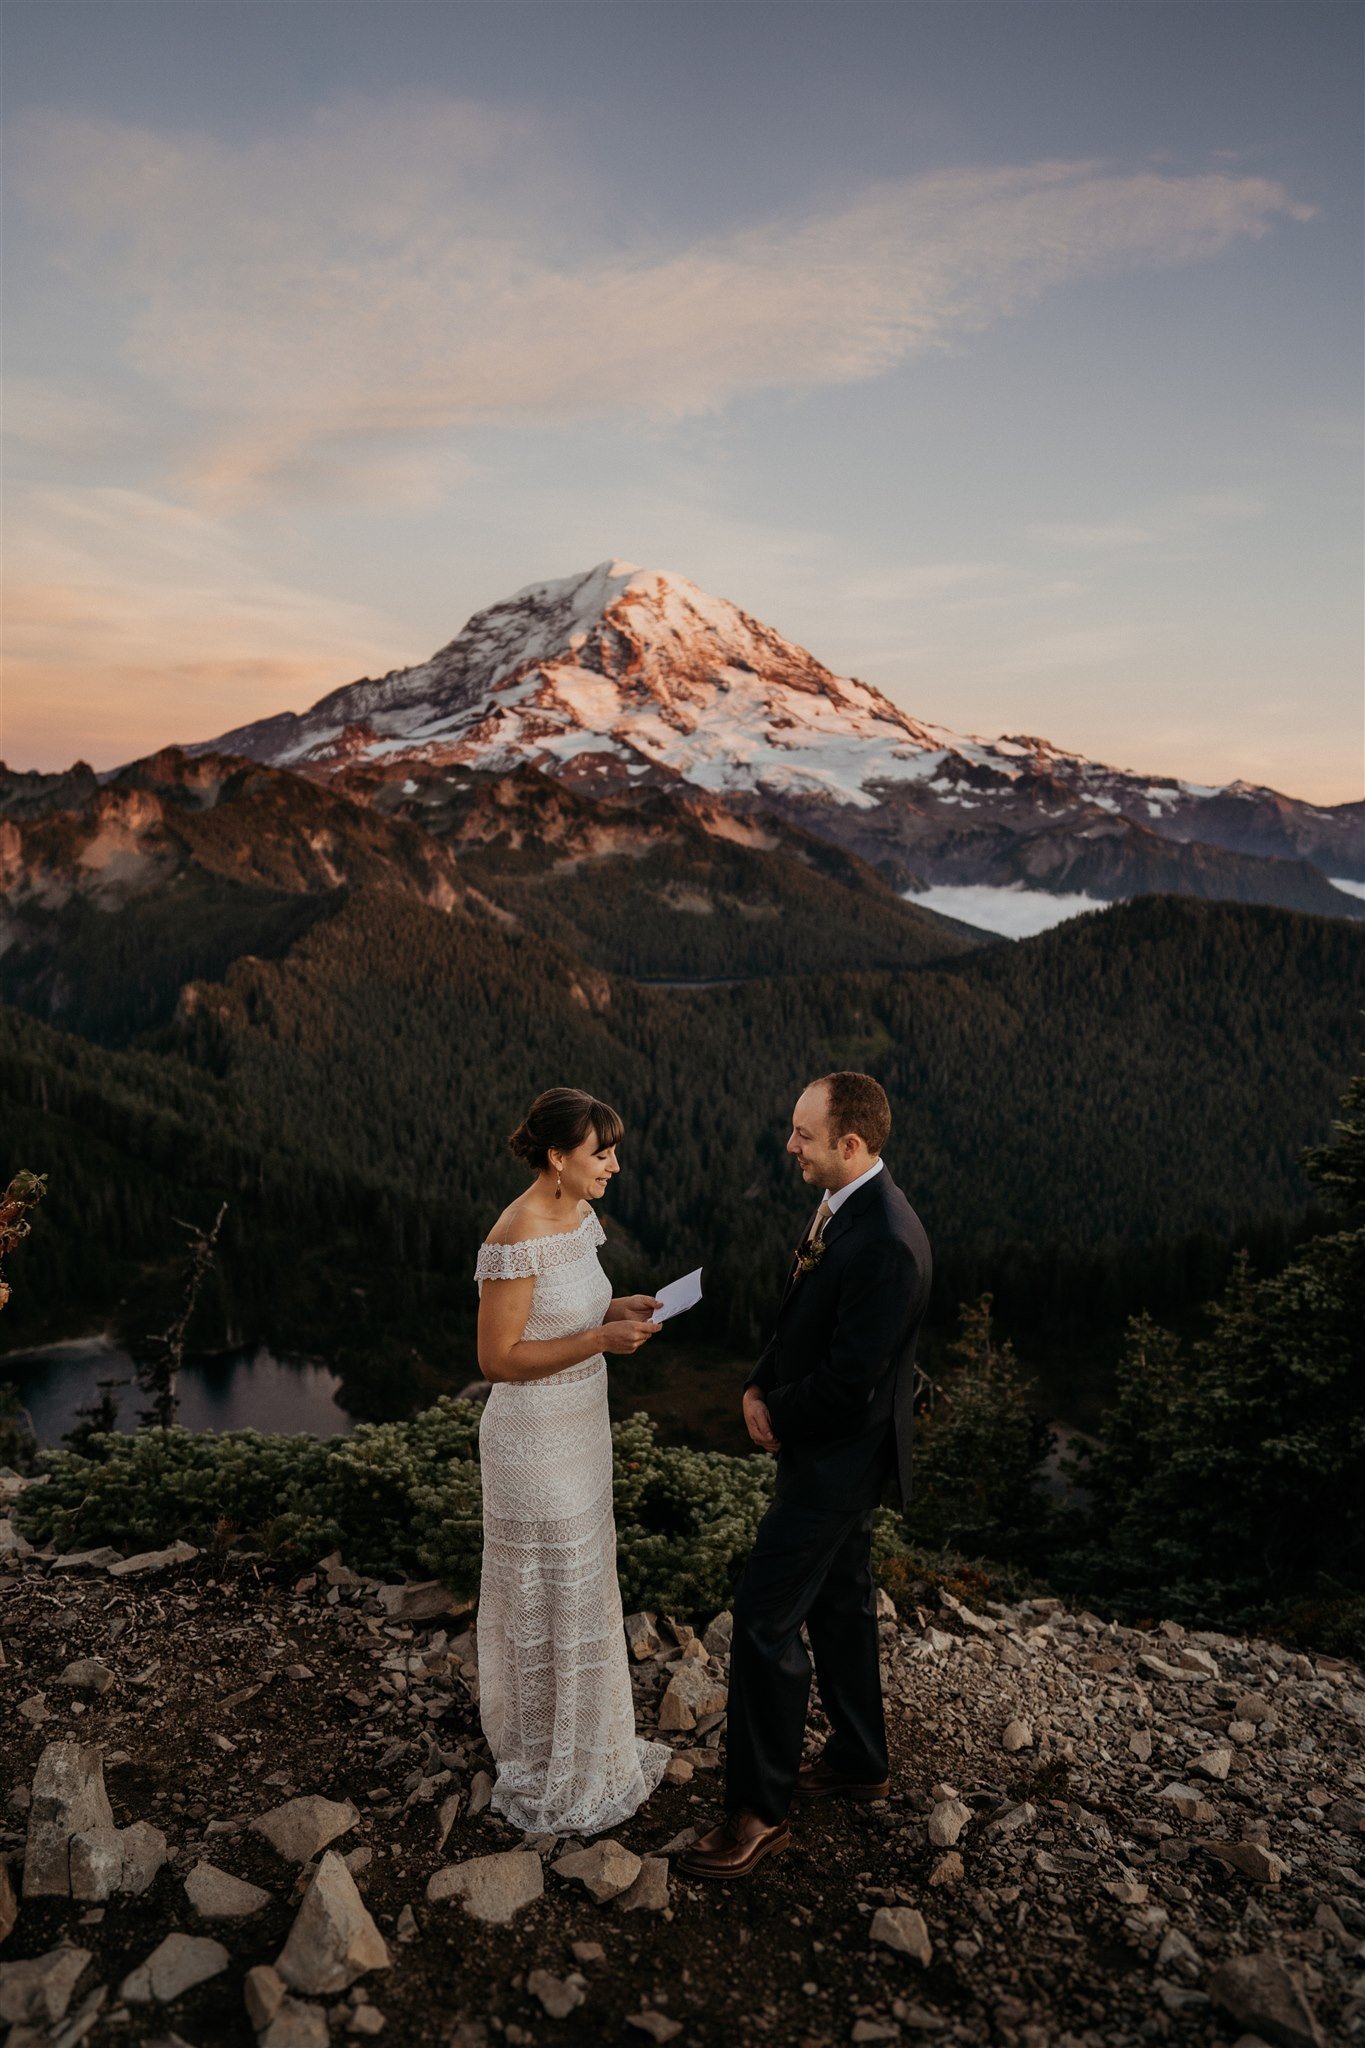 Bride reads vows to groom at fall wedding in Mount Rainier